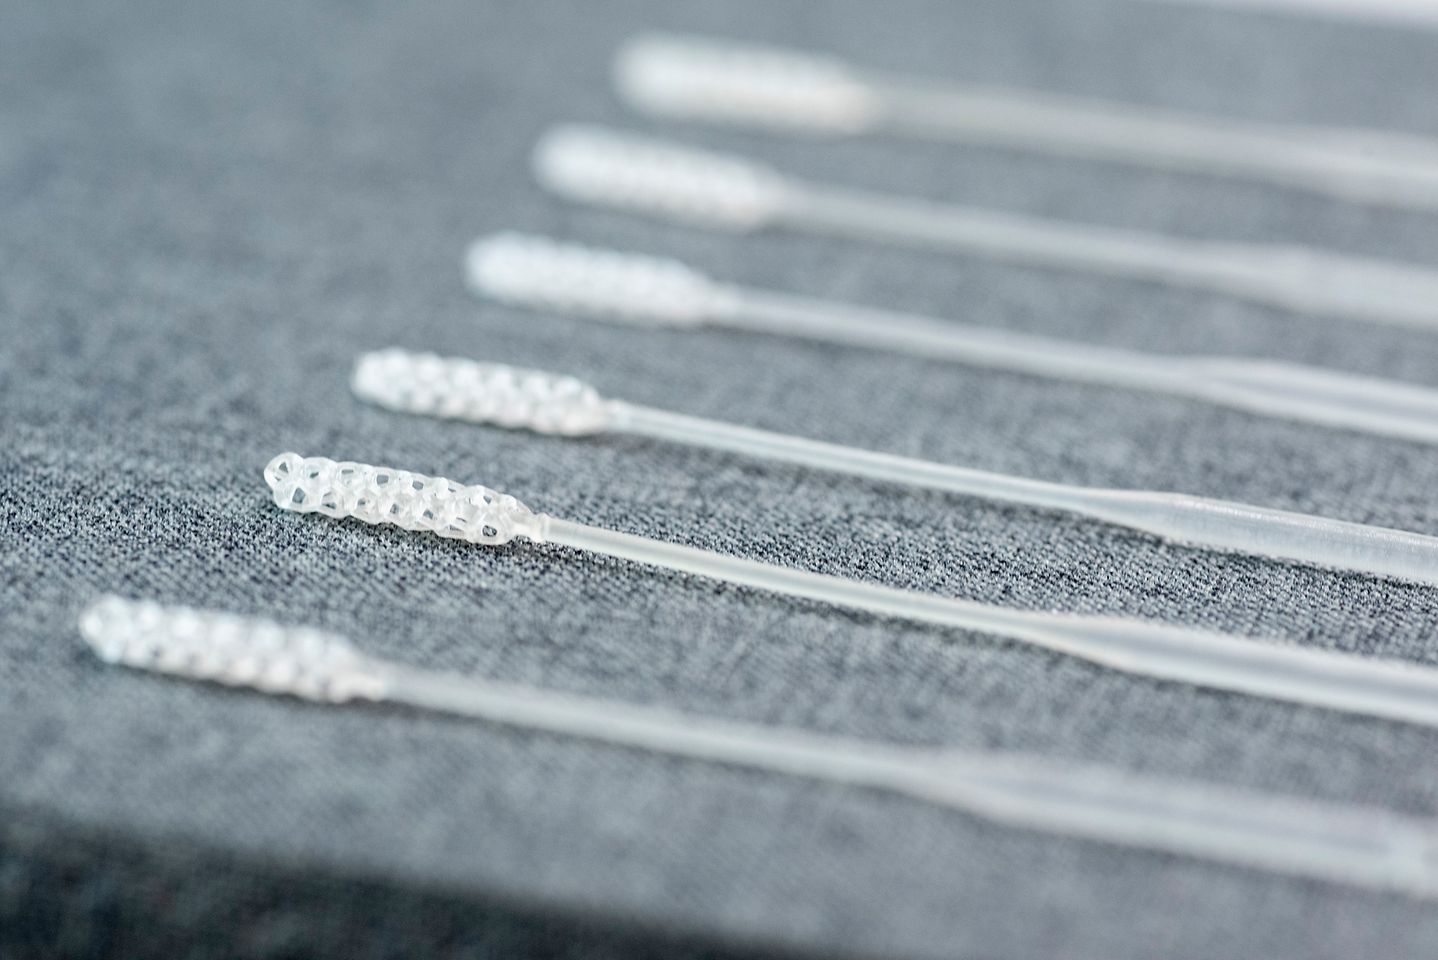 Collaboration between Henkel and Origin: 3D printed NP swabs showing the detailed lattice structure